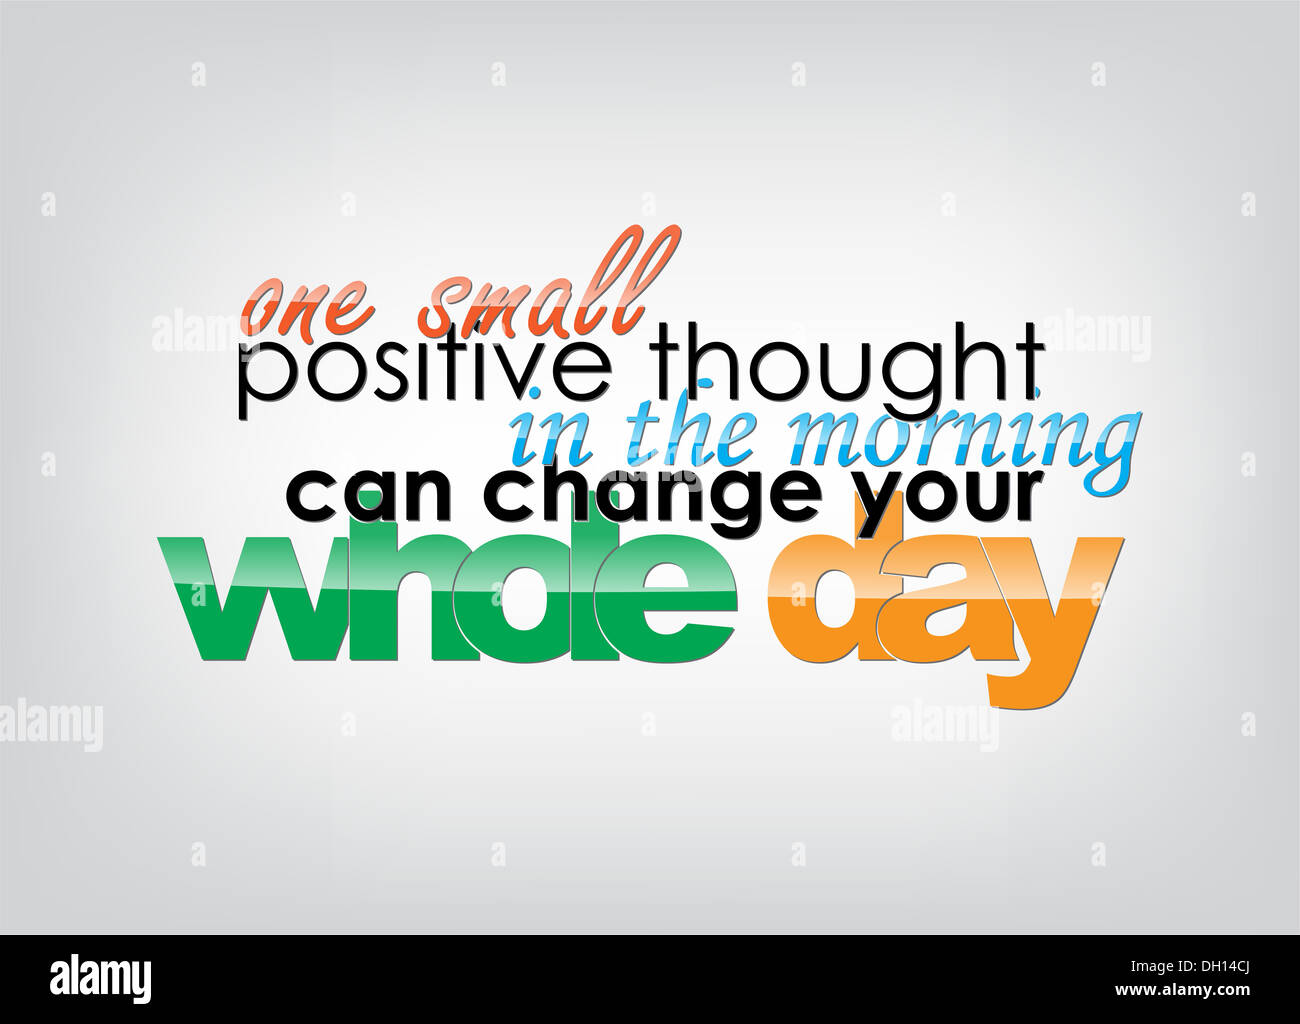 One small positive thought in the morning can change your whole day.  Motivational background. Typography poster Stock Photo - Alamy